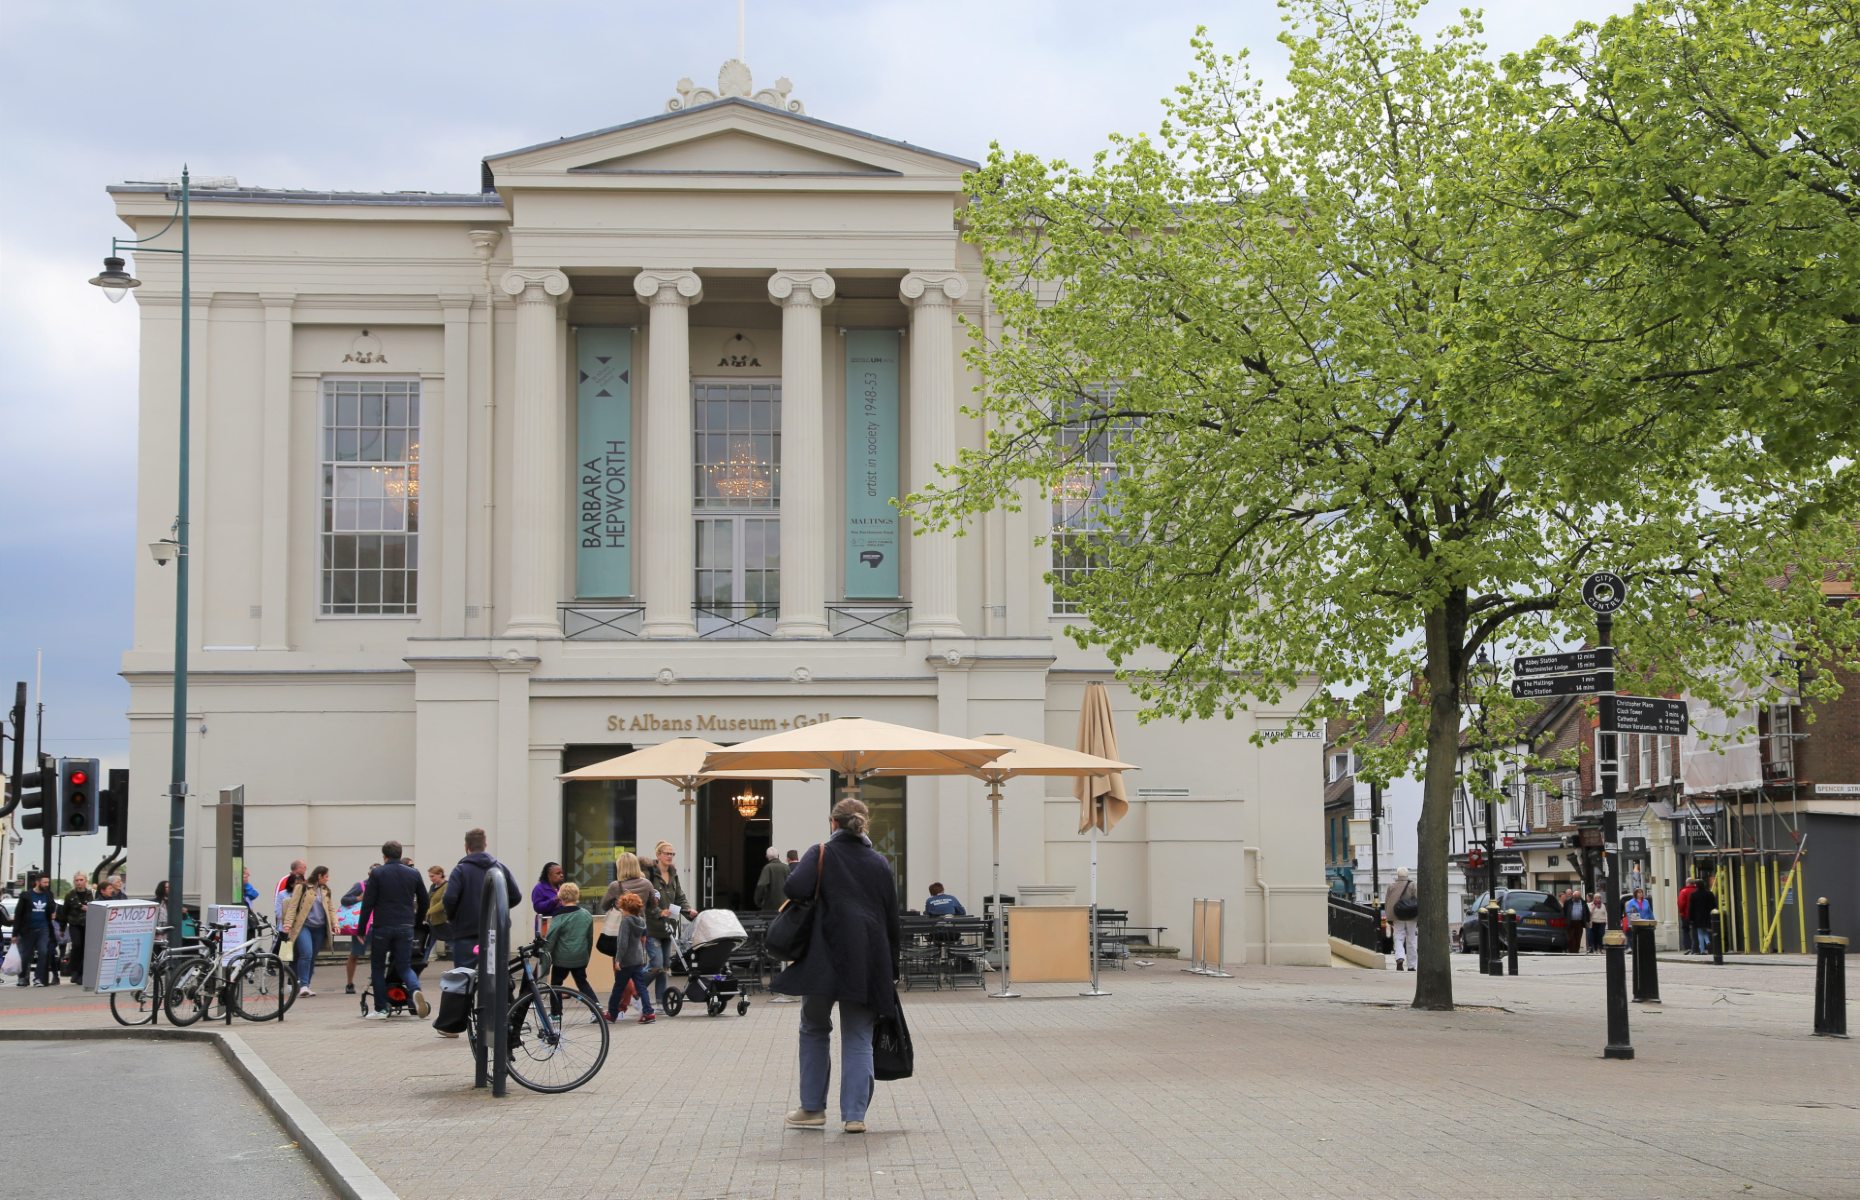 St Albans Museum and Gallery (Image: Wozzie/Shutterstock)